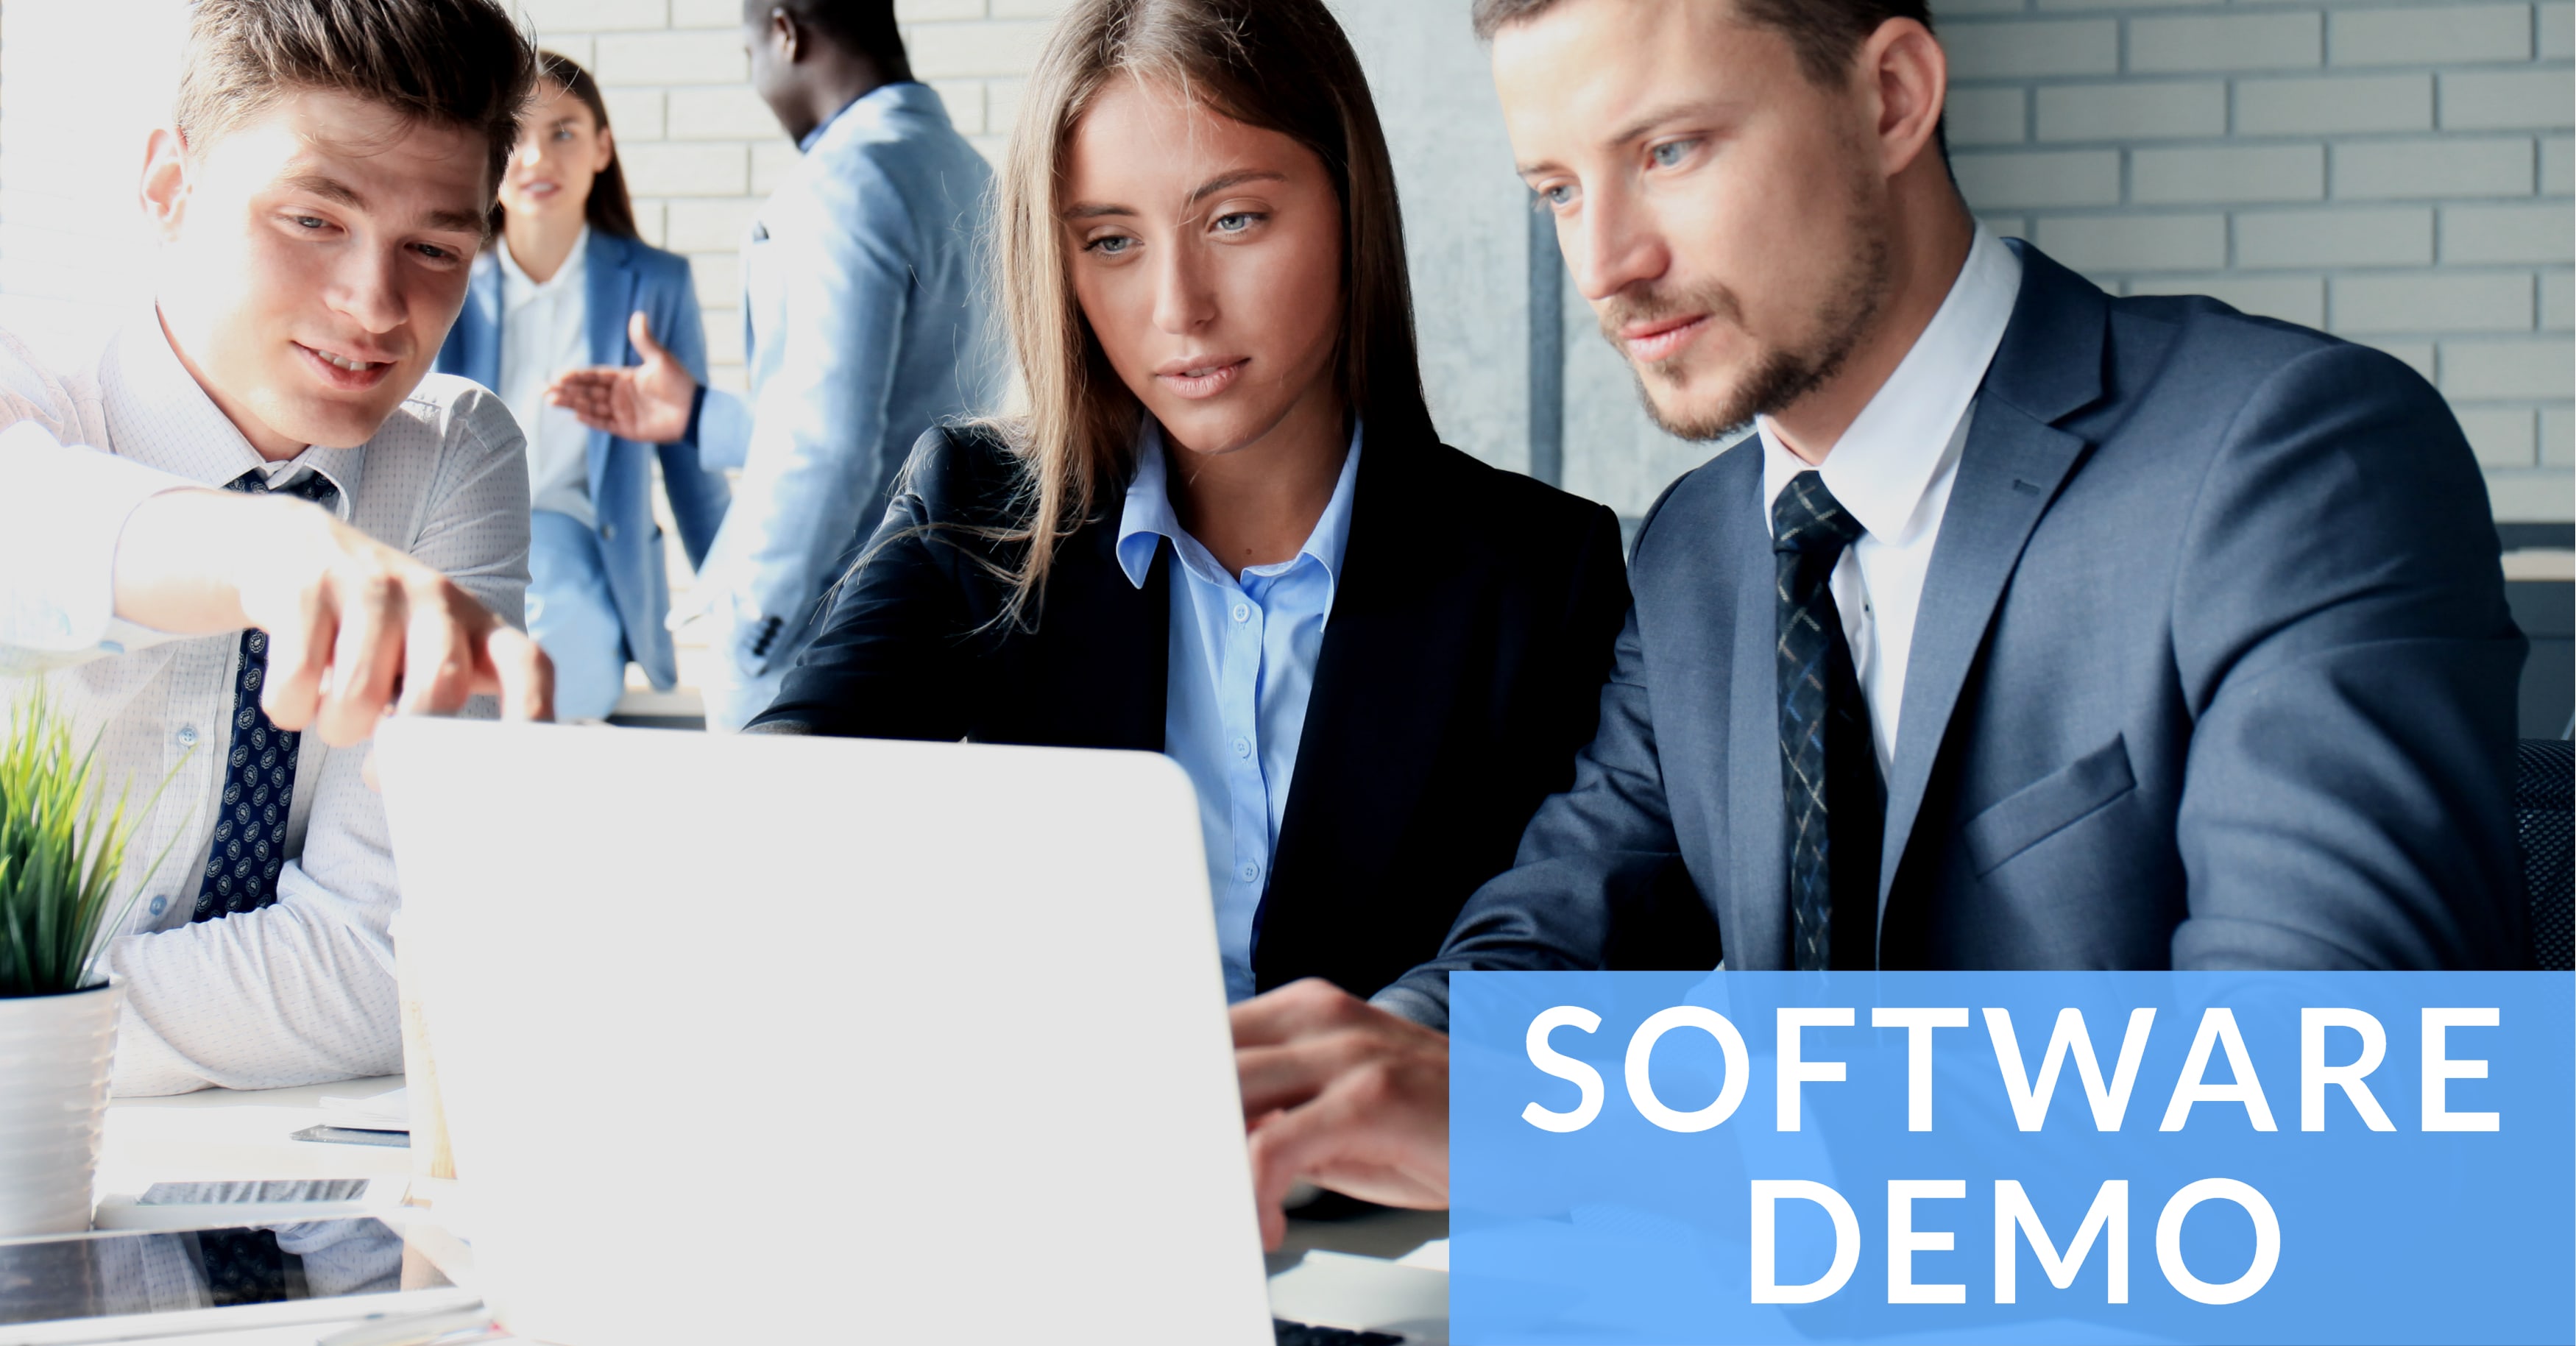 Get the Most from Your Software Demo